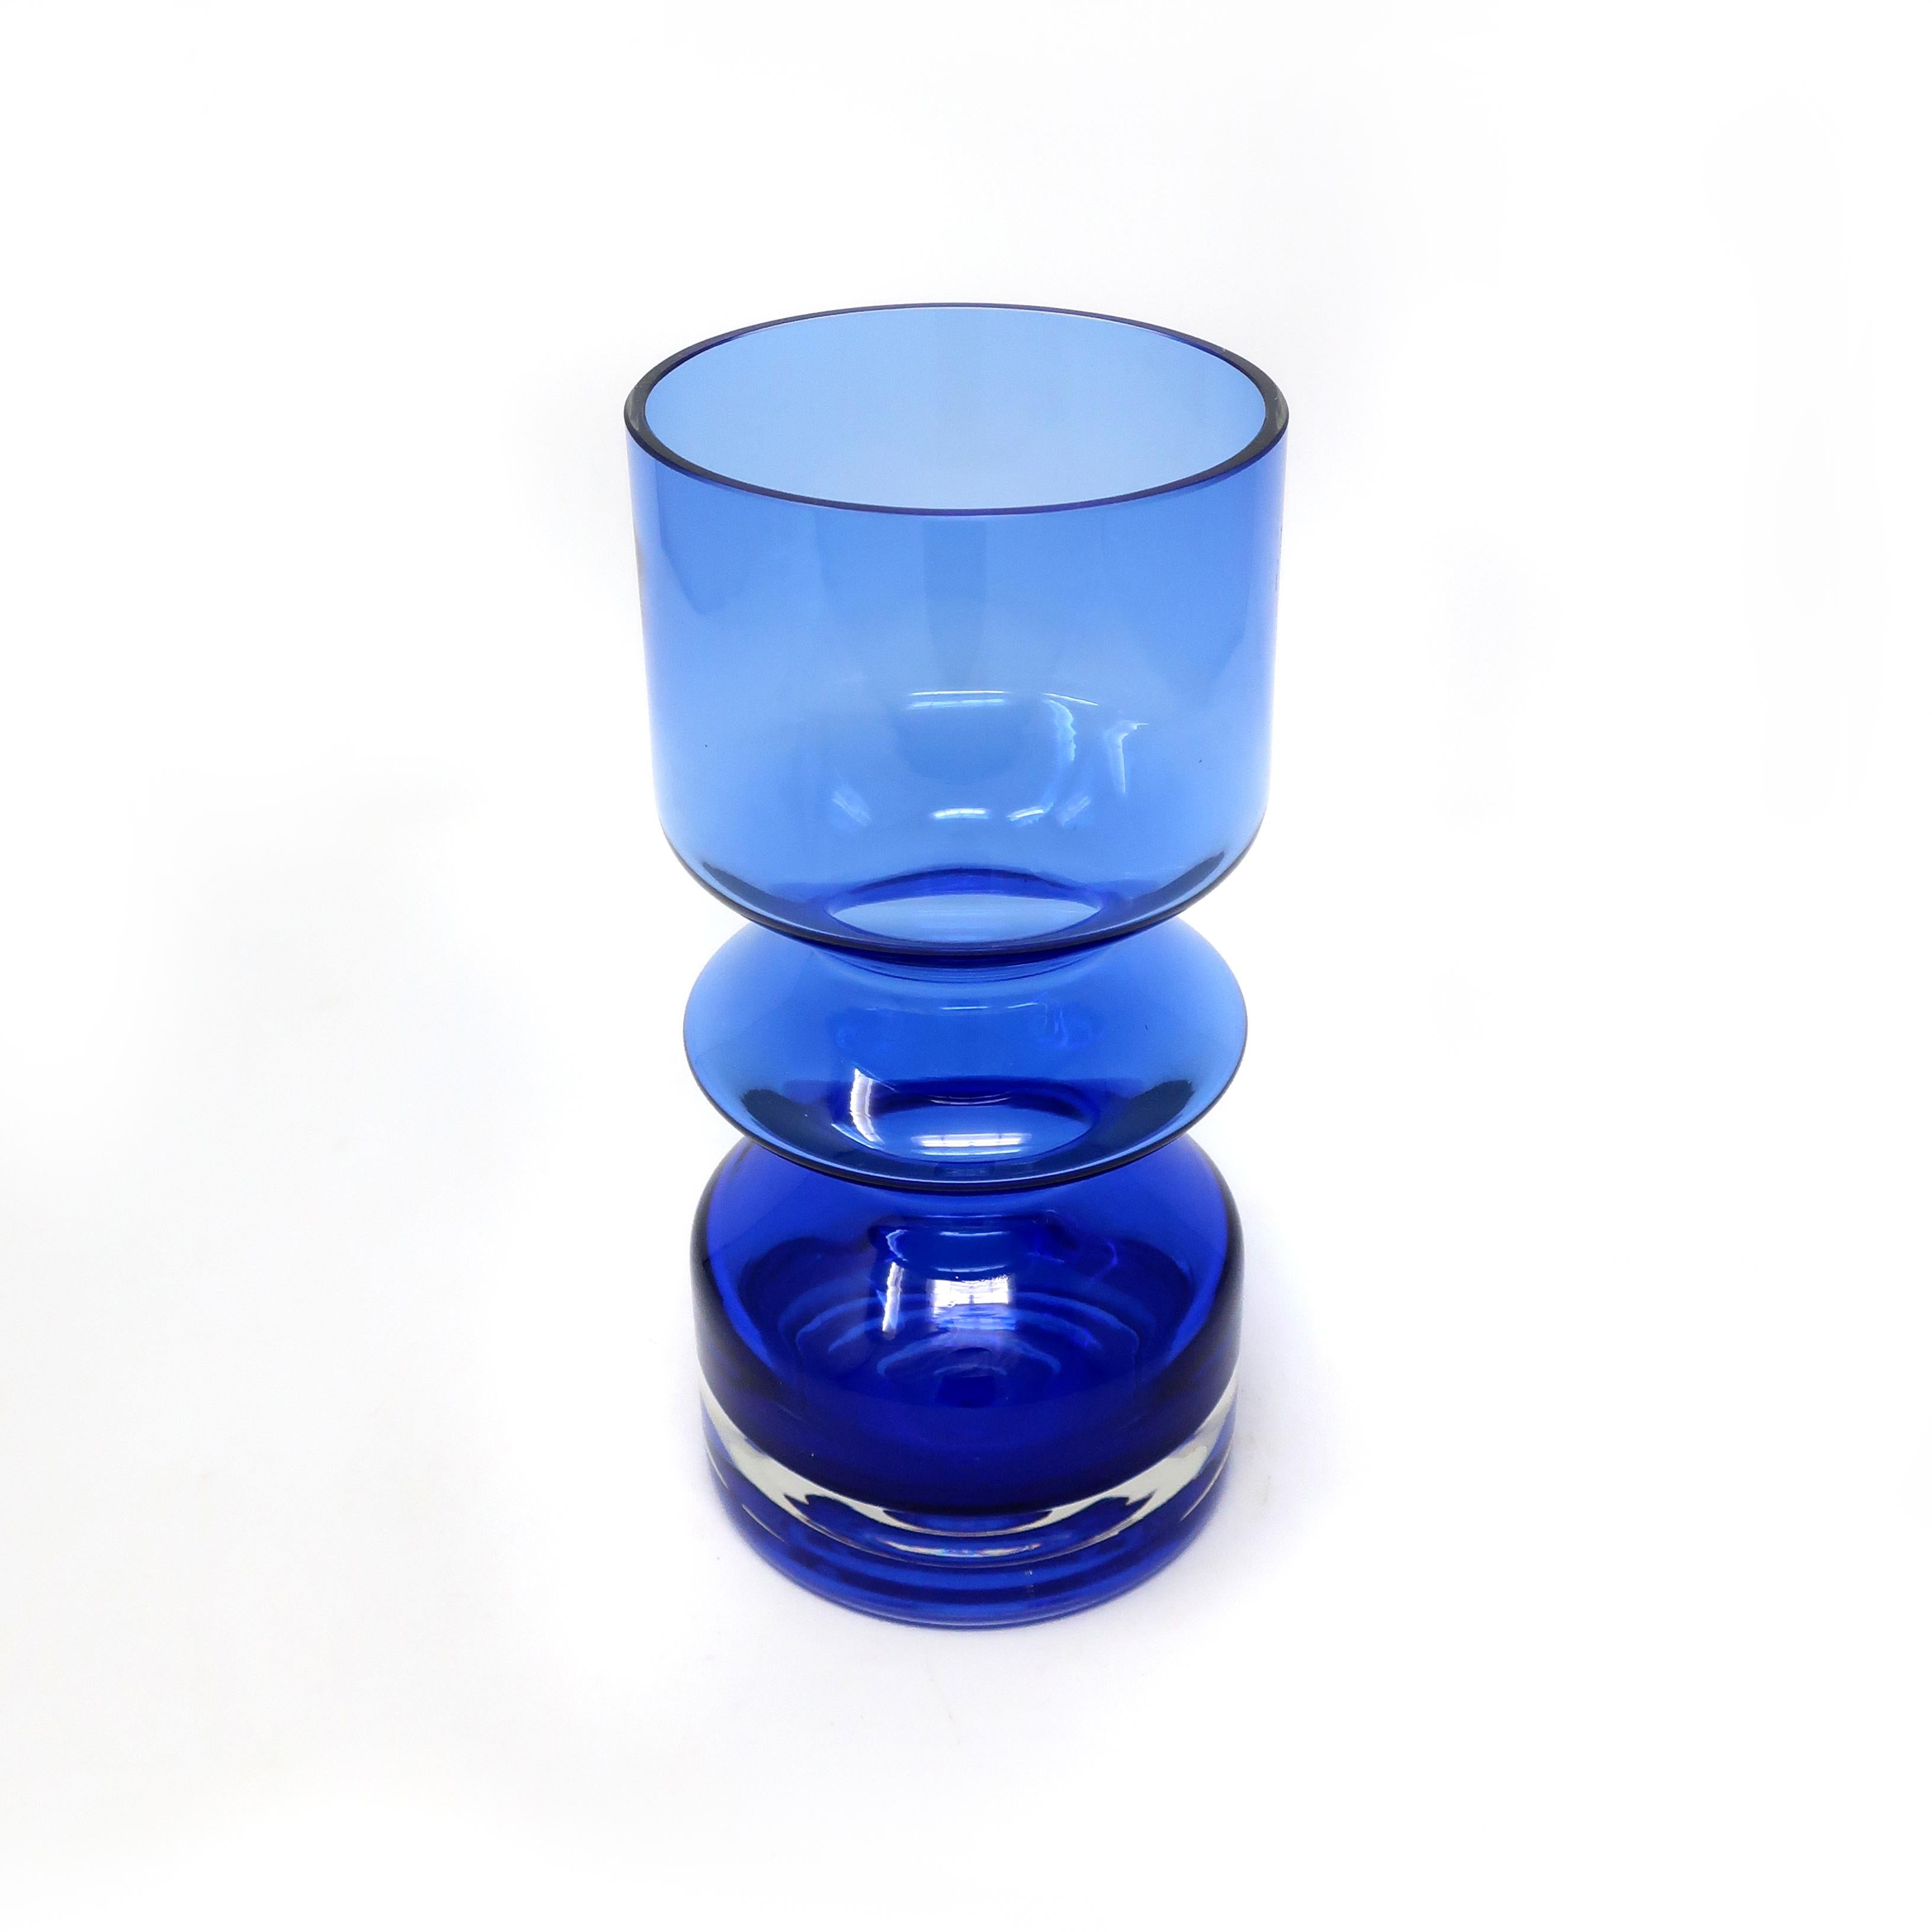 A striking blue finish modernist blown glass vase by Tamara Aladin for Riihimaen Lasi Oy (also referred to as Riihimaki) in a sculptural cylindrical form. In excellent condition.

Measures: 4” x 4” x 8”.